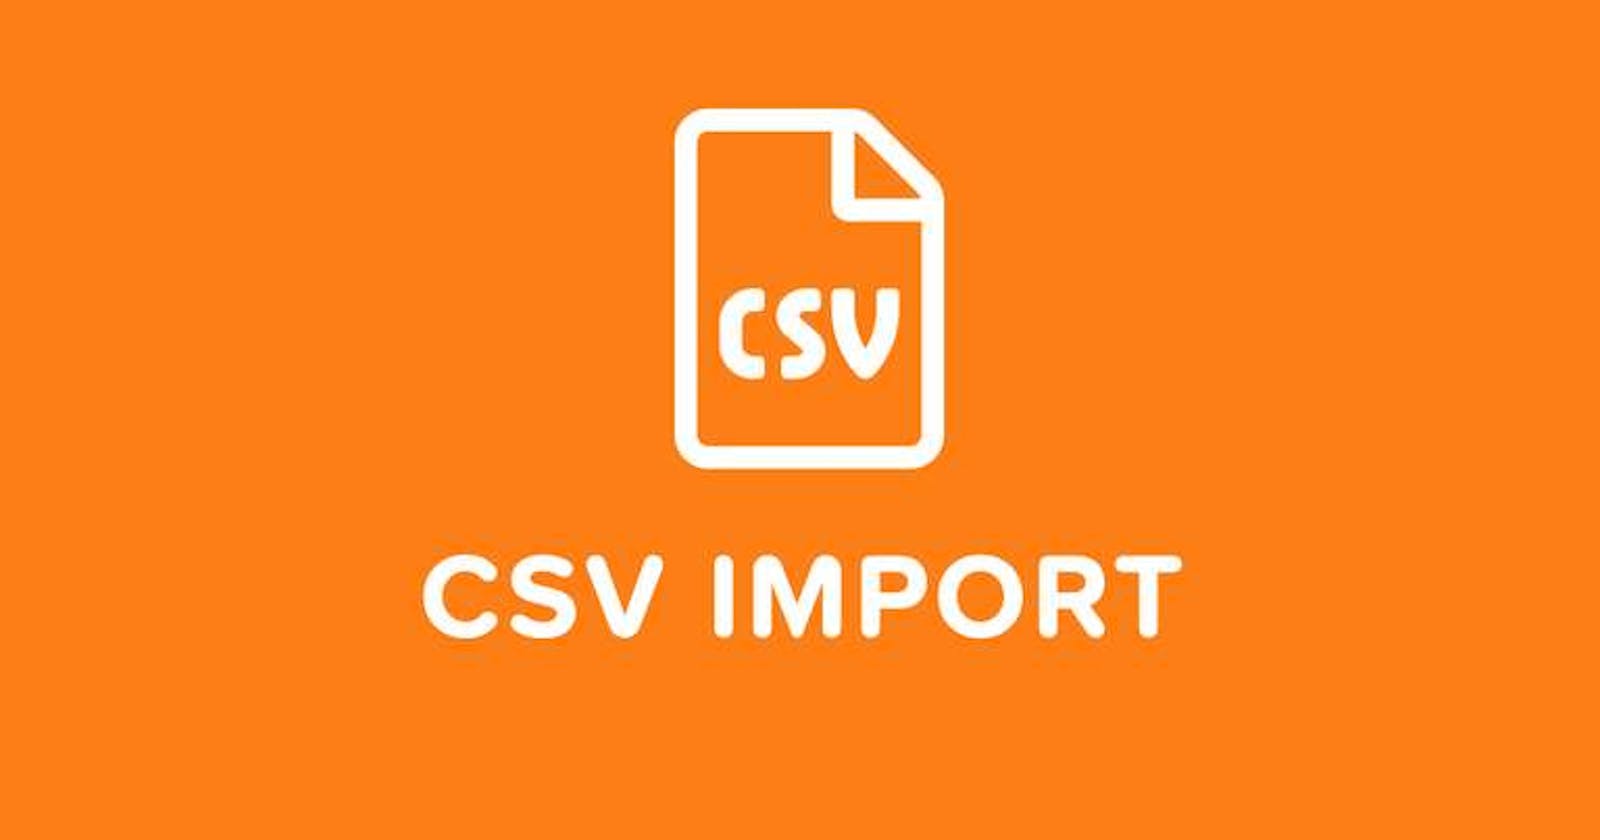 How to import a CSV in Azure SQL Database using Python